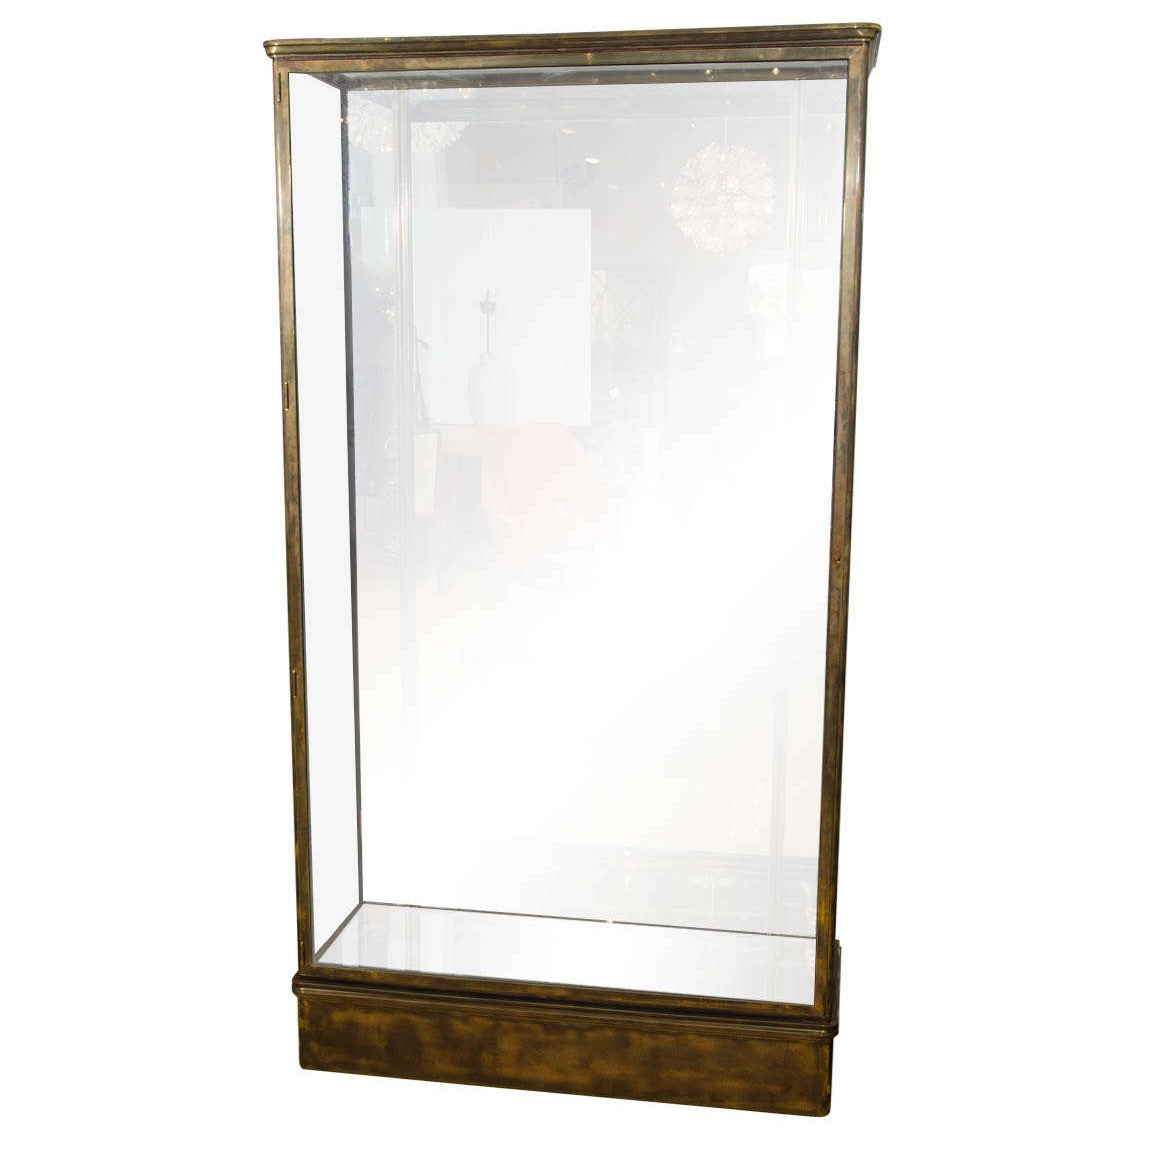 Lanvin Glass and Bronze Vitrines with Glass Shelves, Originally from the 1920s For Sale